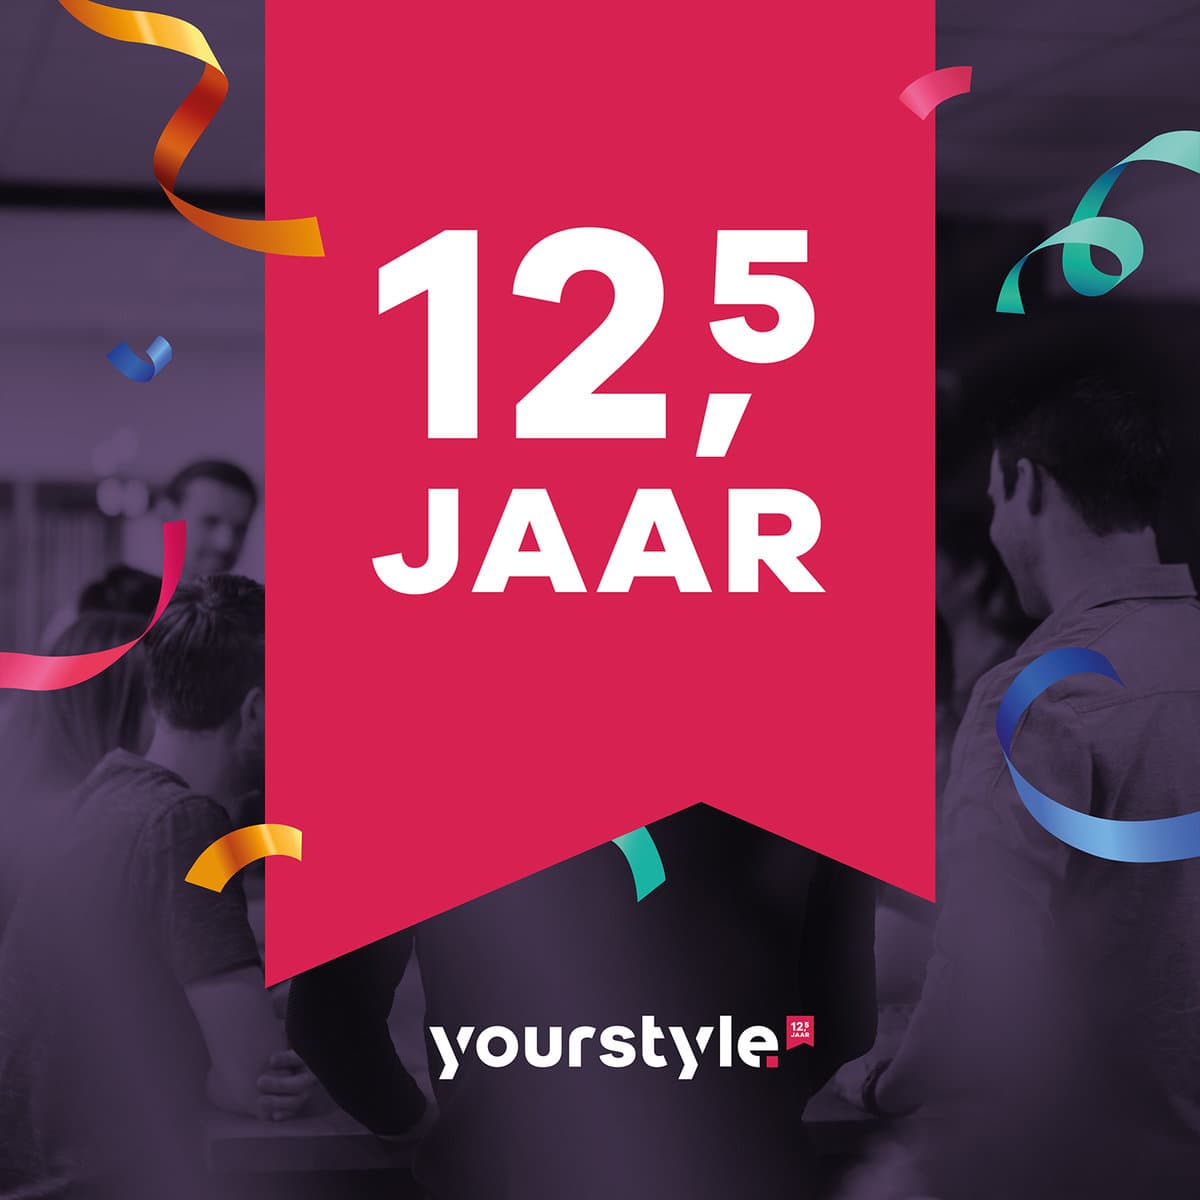 V1_125-jaar-visual_Yourstyle-1